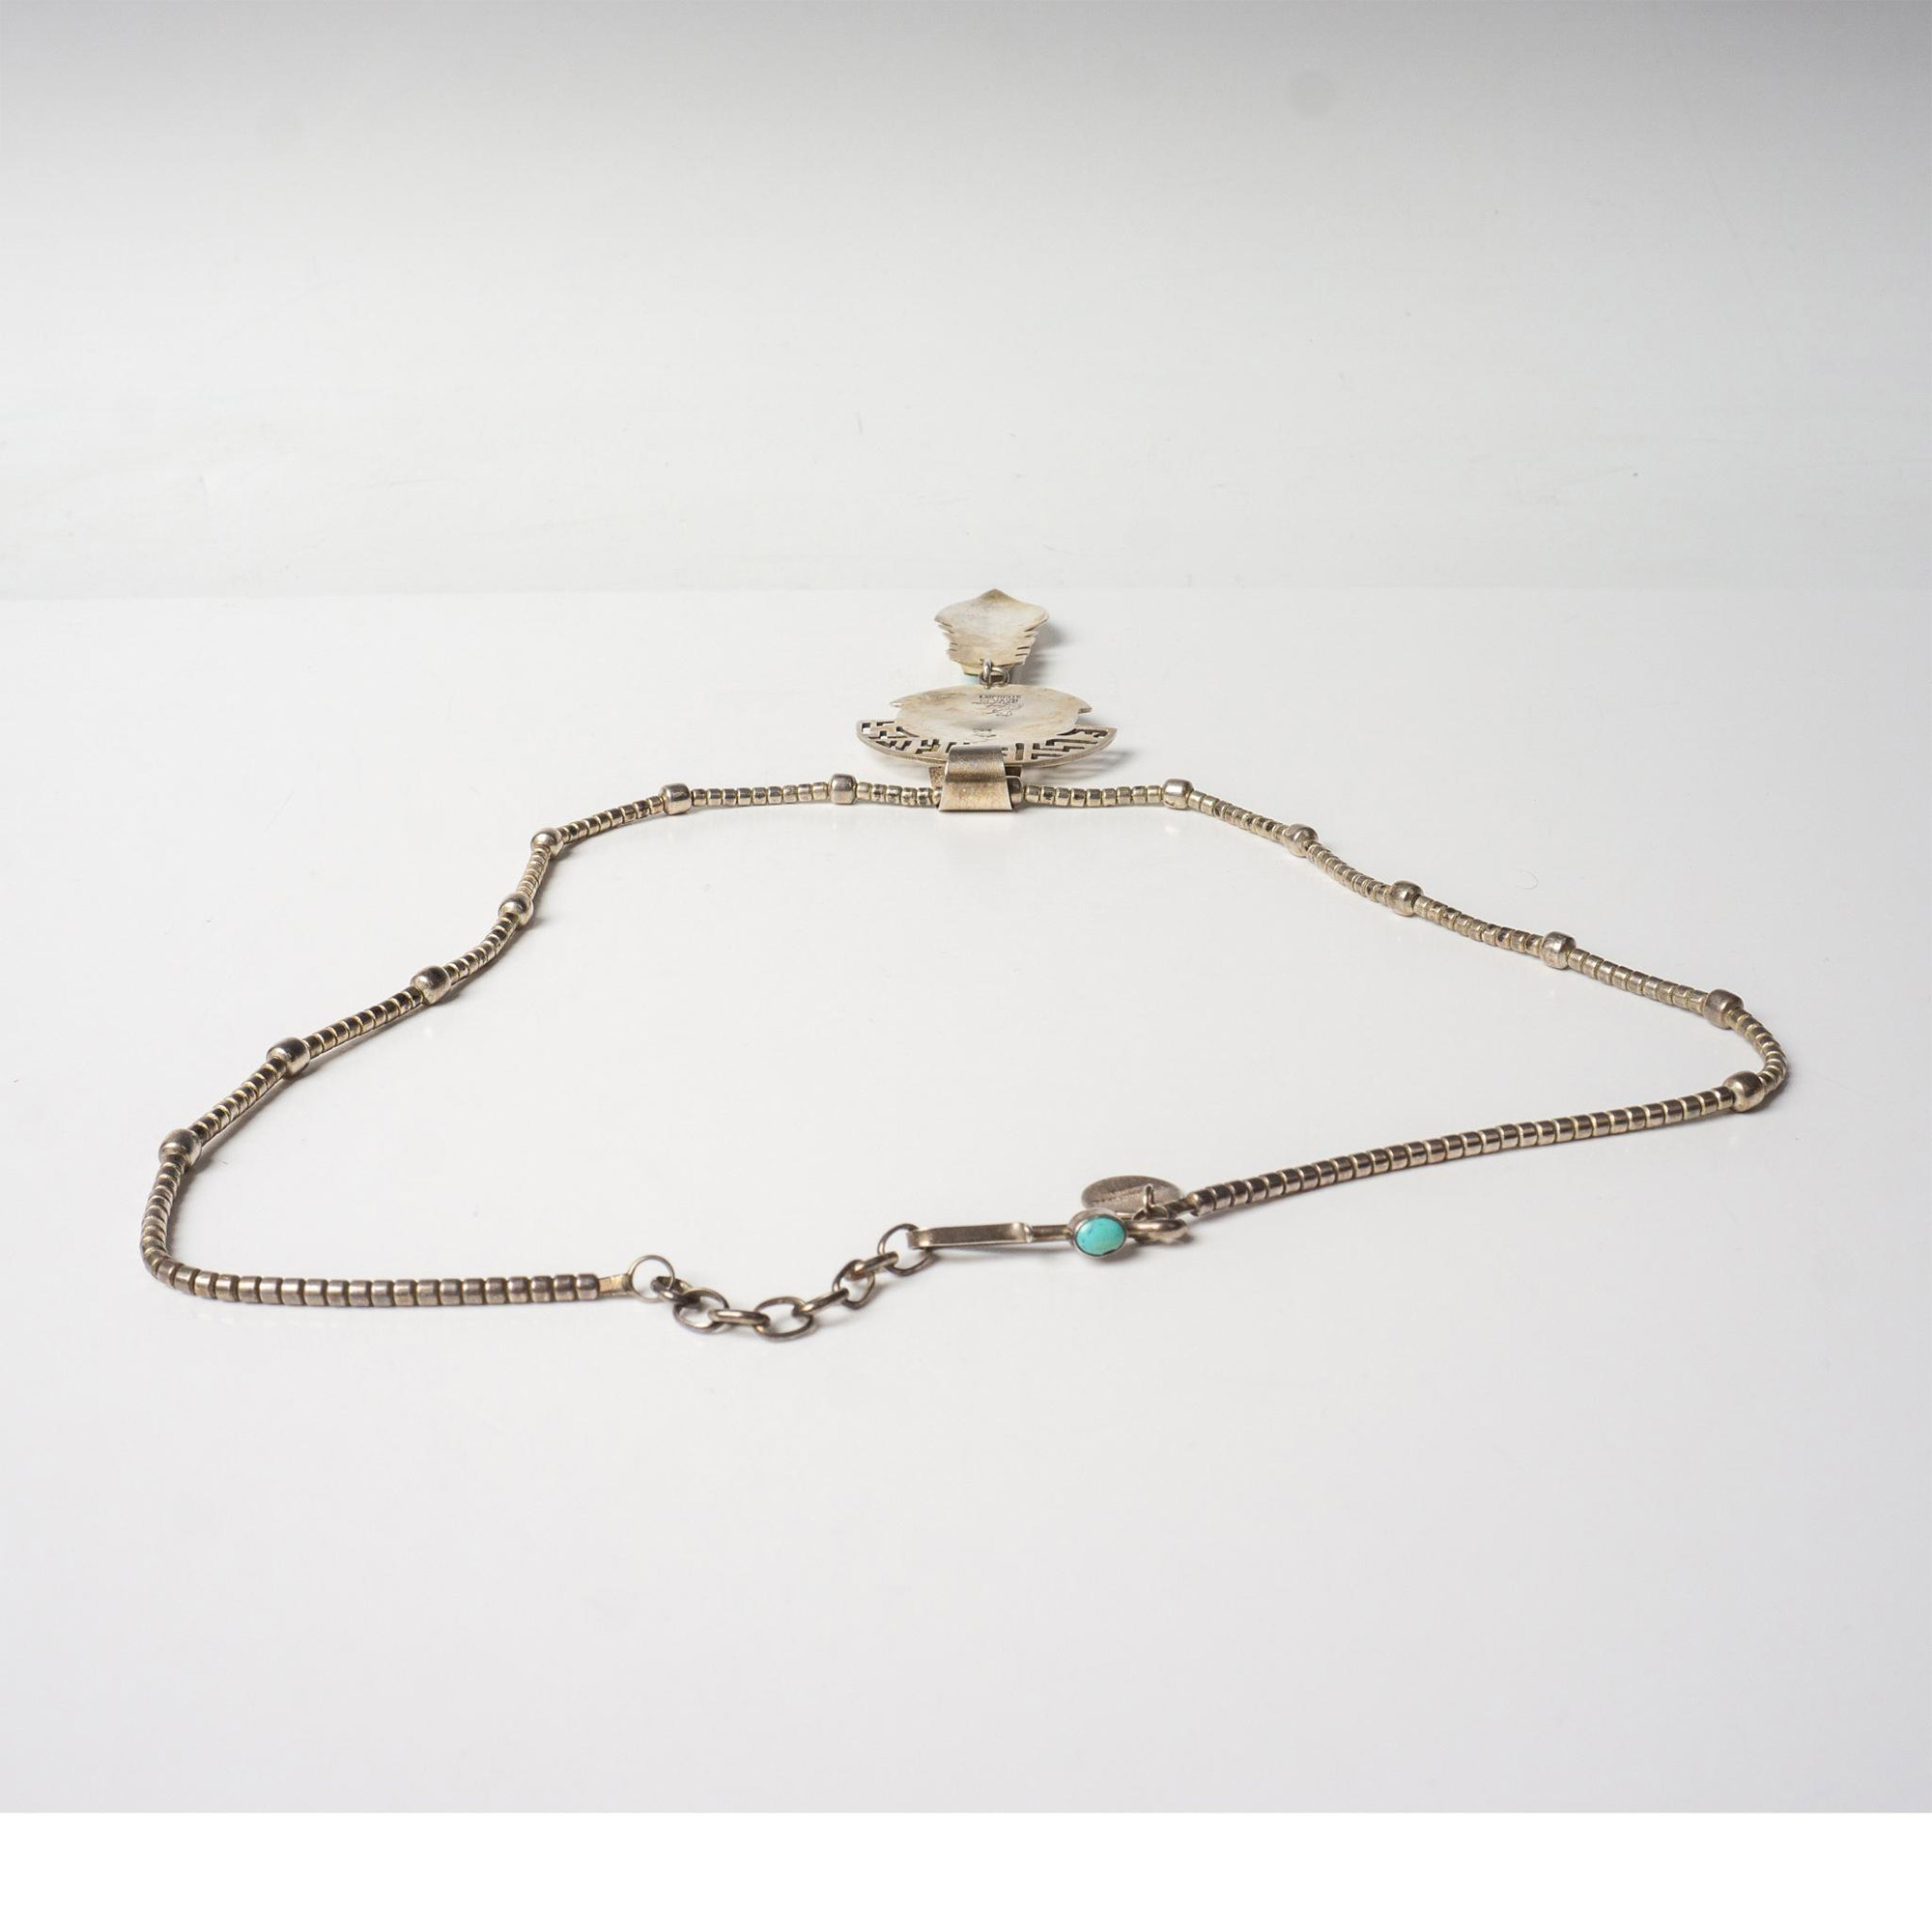 Frank Yellowhorse Navajo Sterling Multi-Stone Inlay Necklace - Image 6 of 7